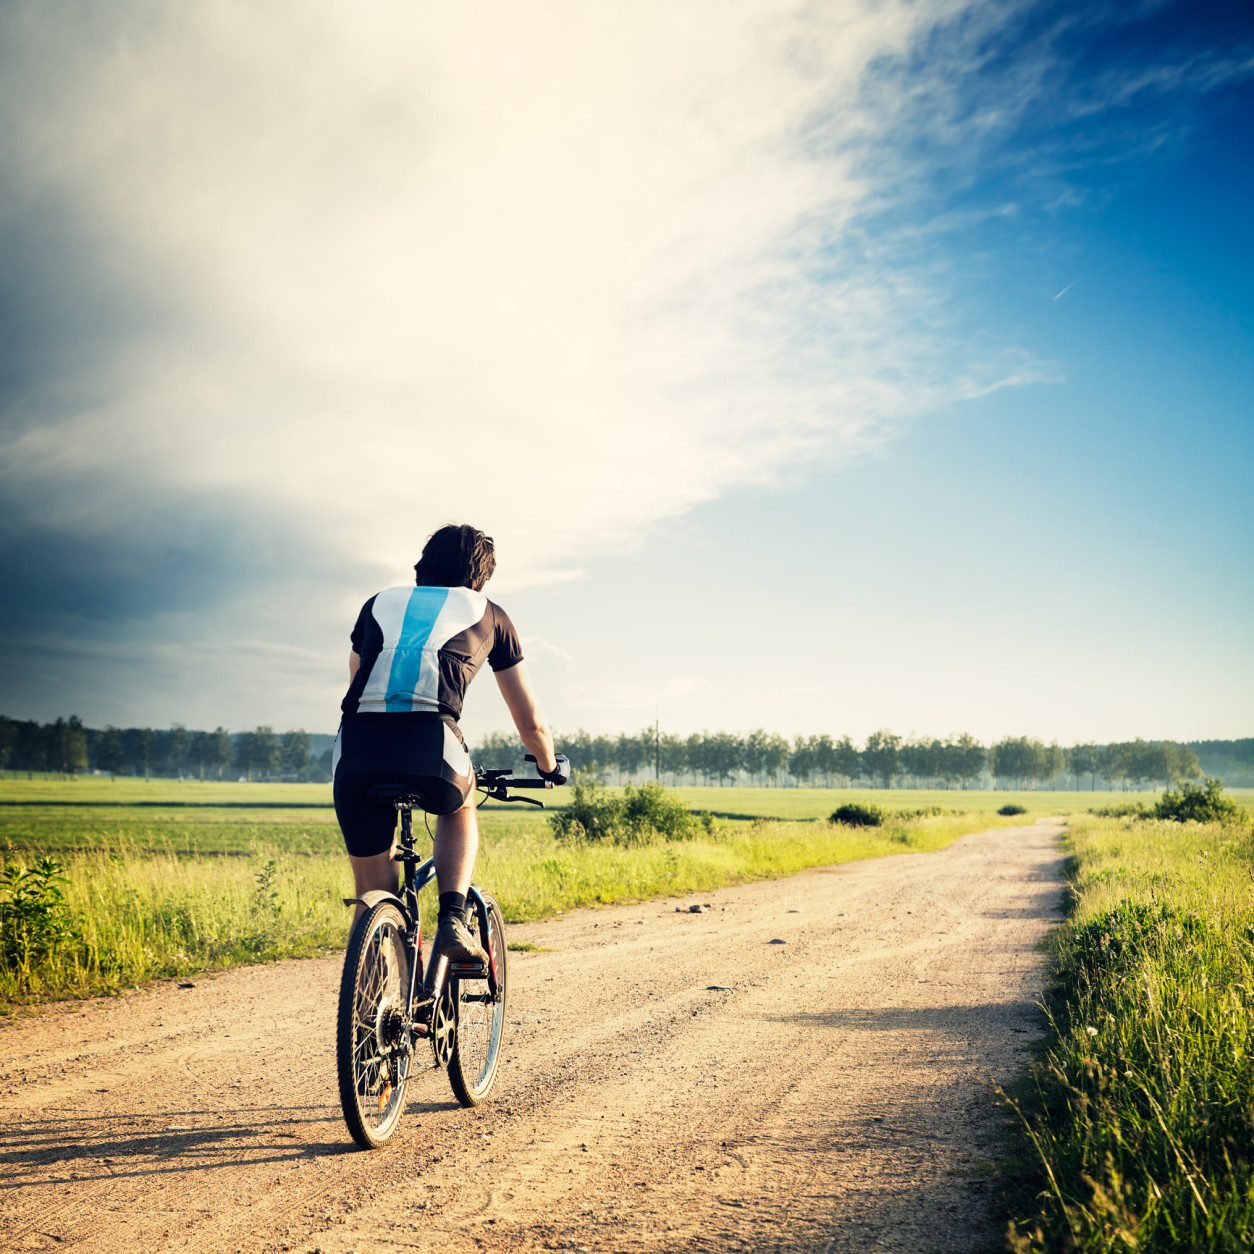 Cyclist Riding a Bike on the Country Road. Rear View. Summer Nature Background. Healthy Lifestyle Concept. Instagram Styled Toned and Filtered Photo. Copy Space.